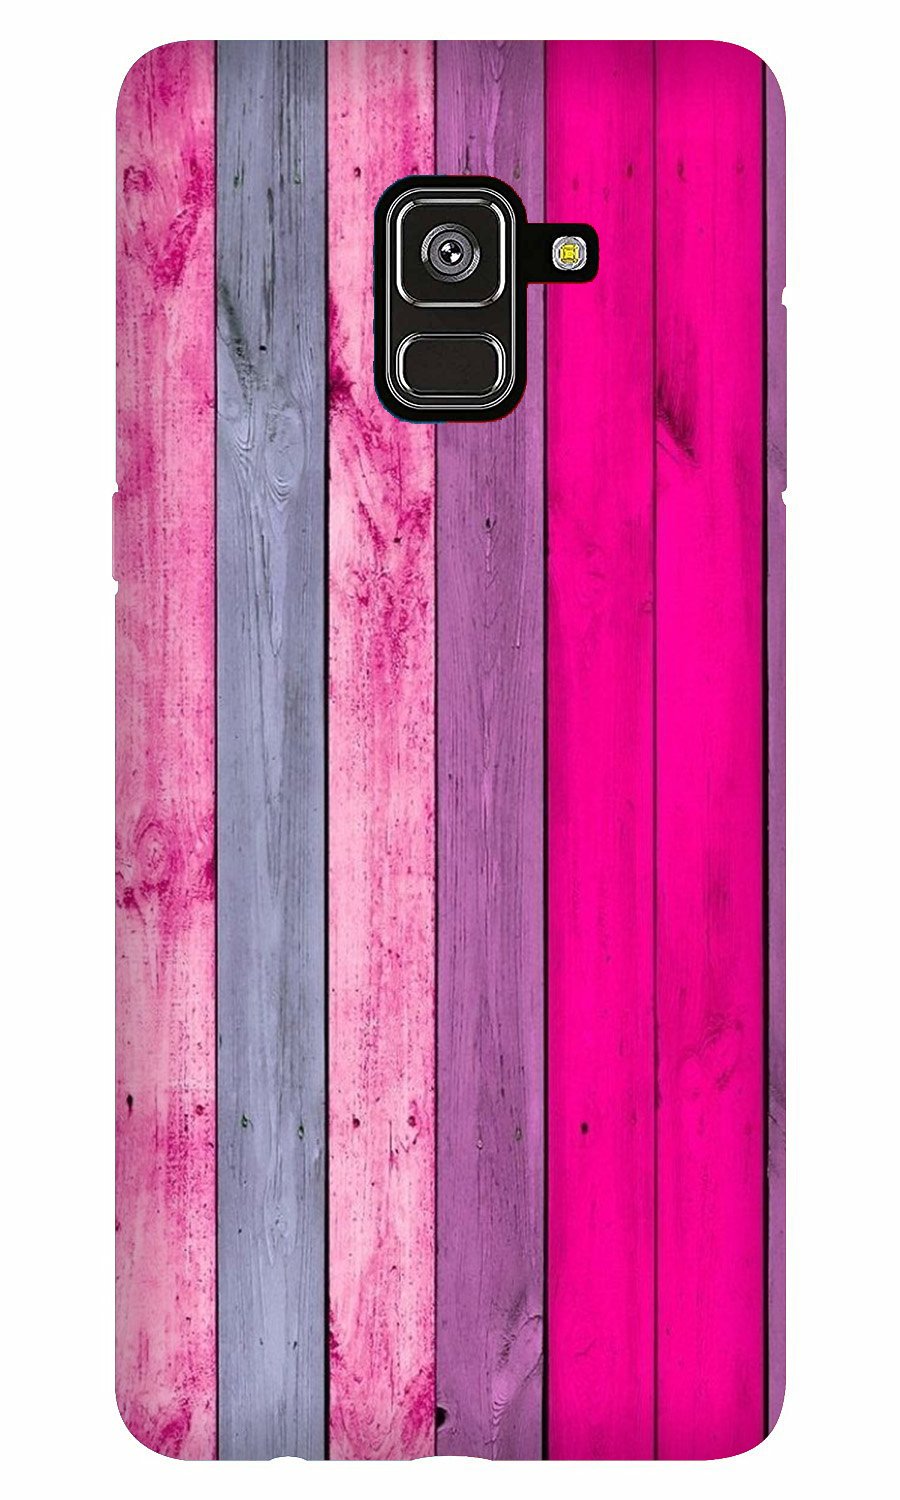 Wooden look Case for Galaxy A8 Plus